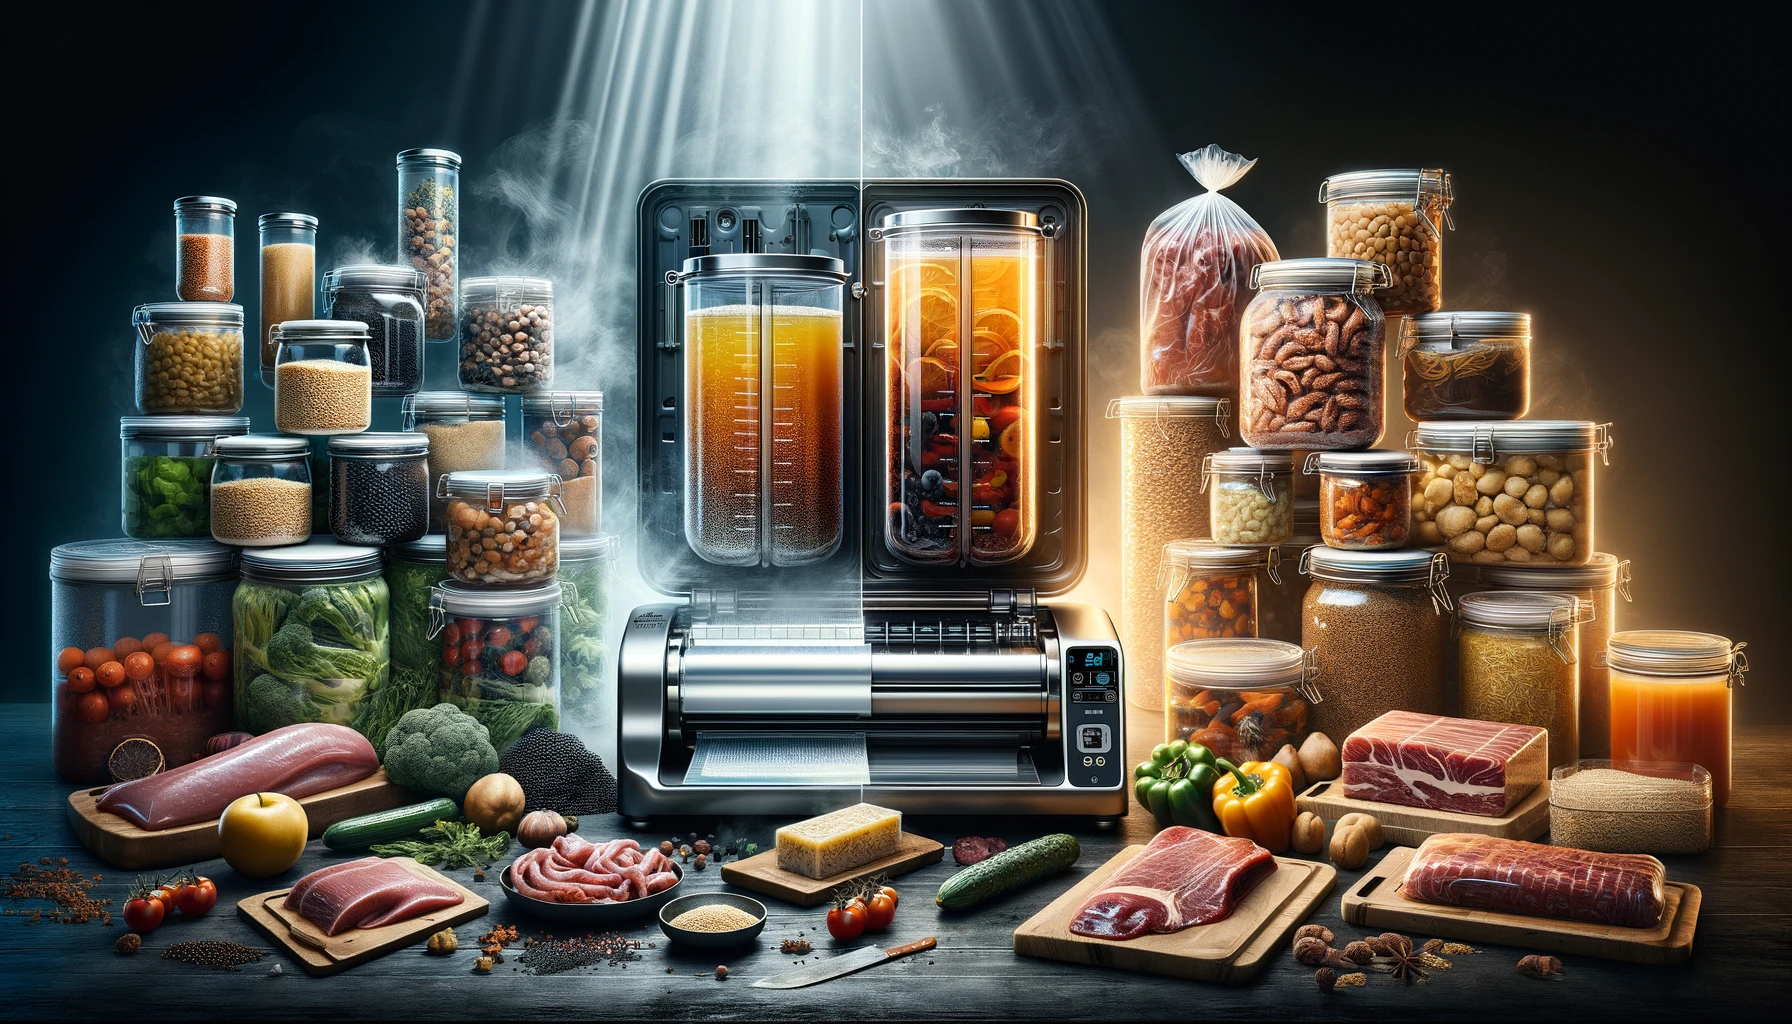 Best practices for using a vacuum sealer in prepping, showcasing a split scene with liquids being sealed in a specialized container on the left, and solid foods like meats, vegetables, and grains perfectly vacuum-sealed on the right. The background highlights a variety of long-term storage solutions, emphasizing the vacuum sealer's versatility for preppers